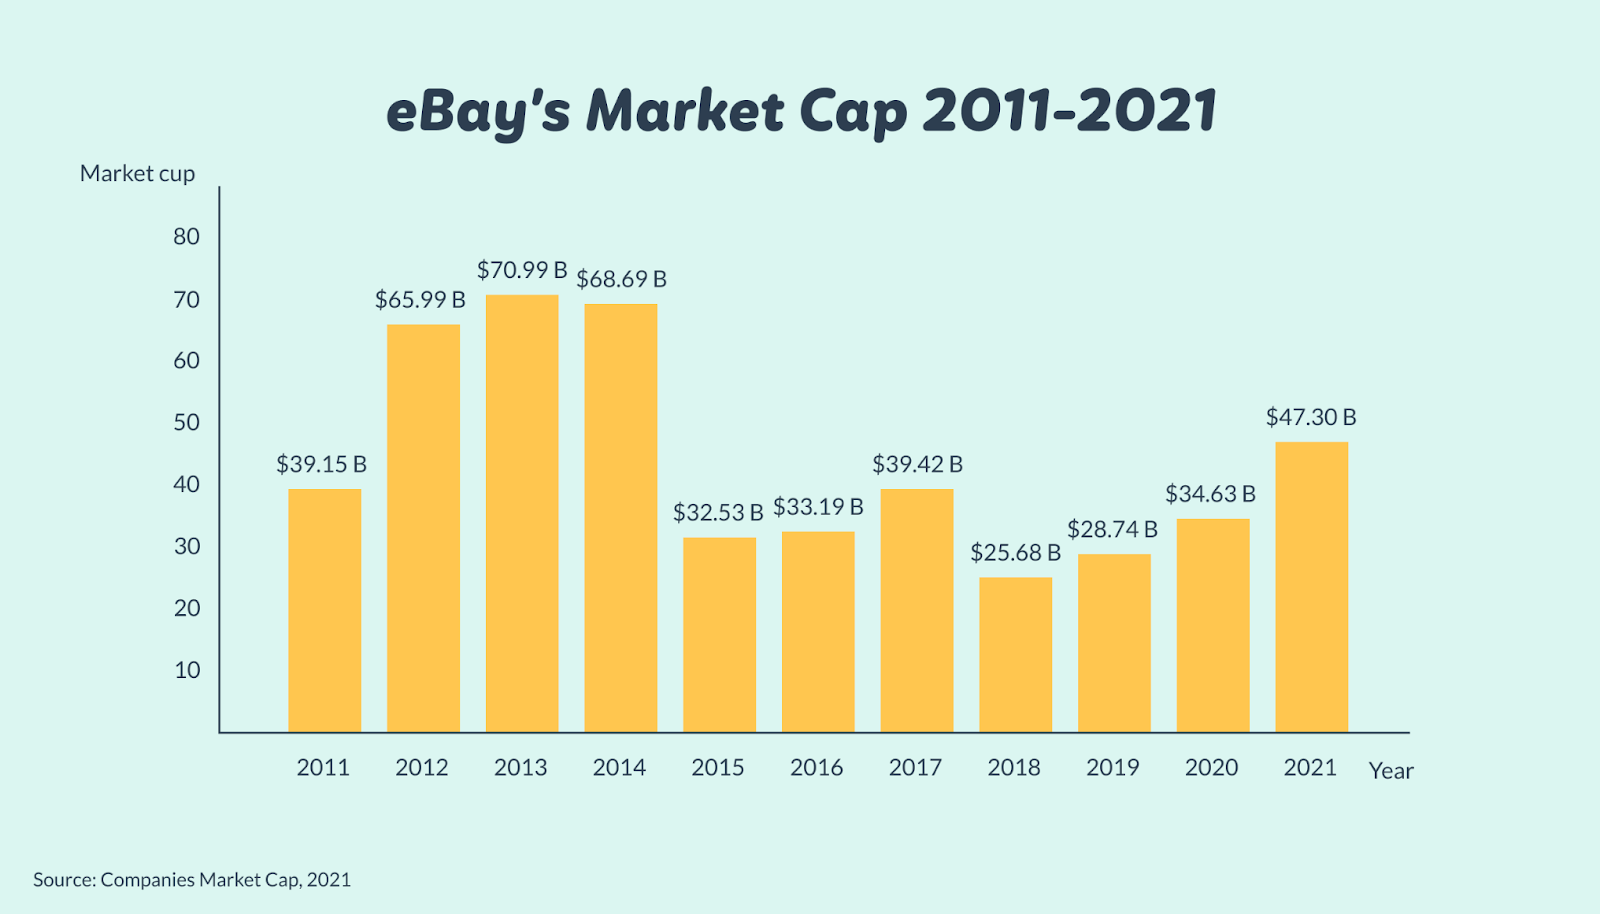 graph depicting the growth in ebay’s market cap from 2011 to 2021